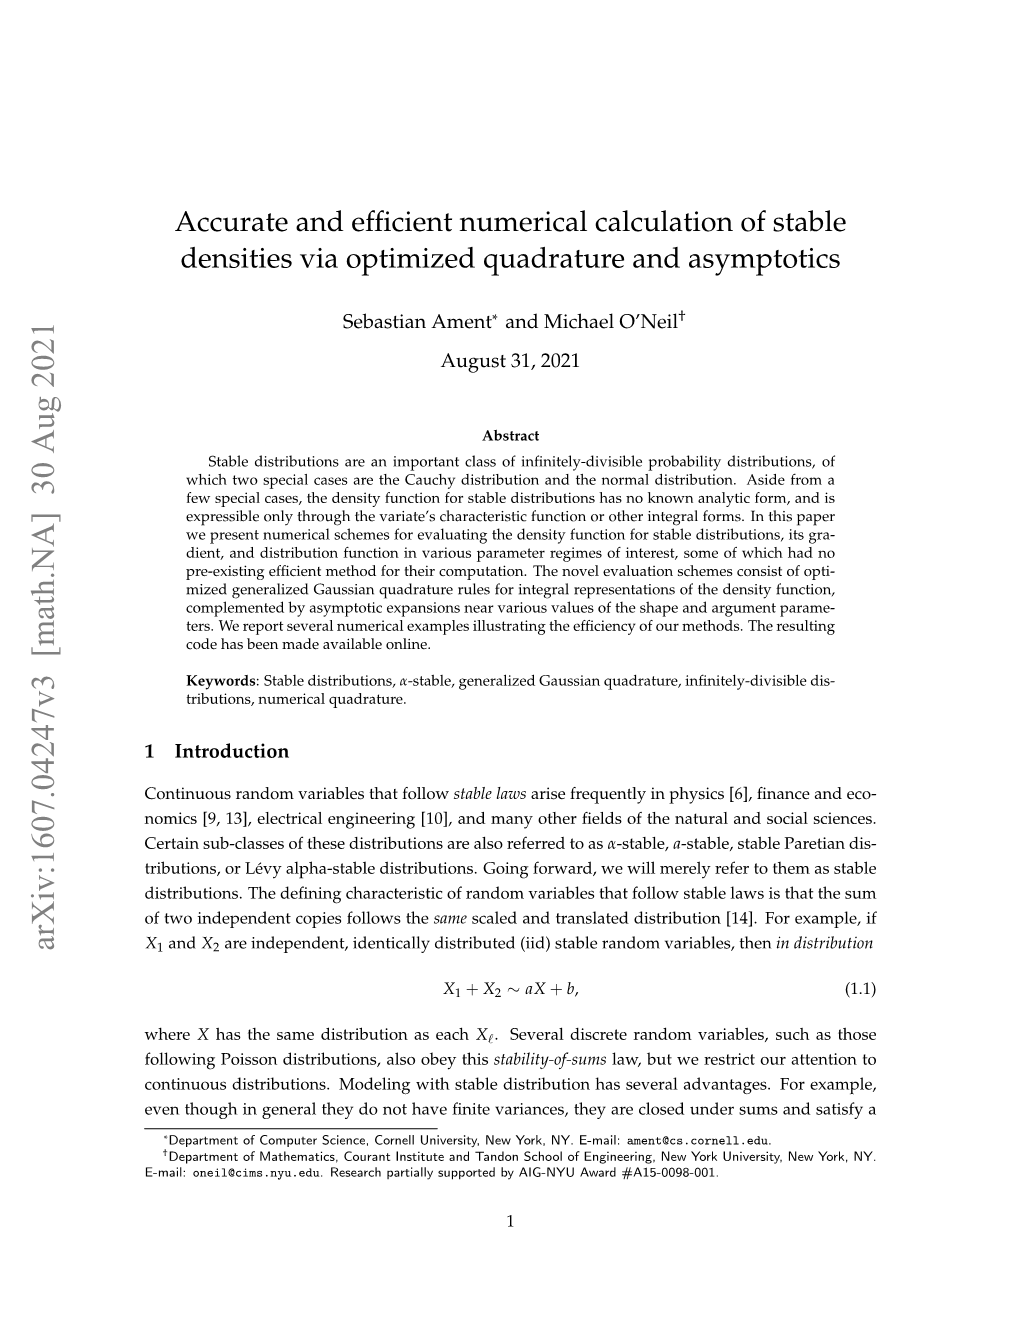 Accurate and Efficient Numerical Calculation of Stable Densities Via